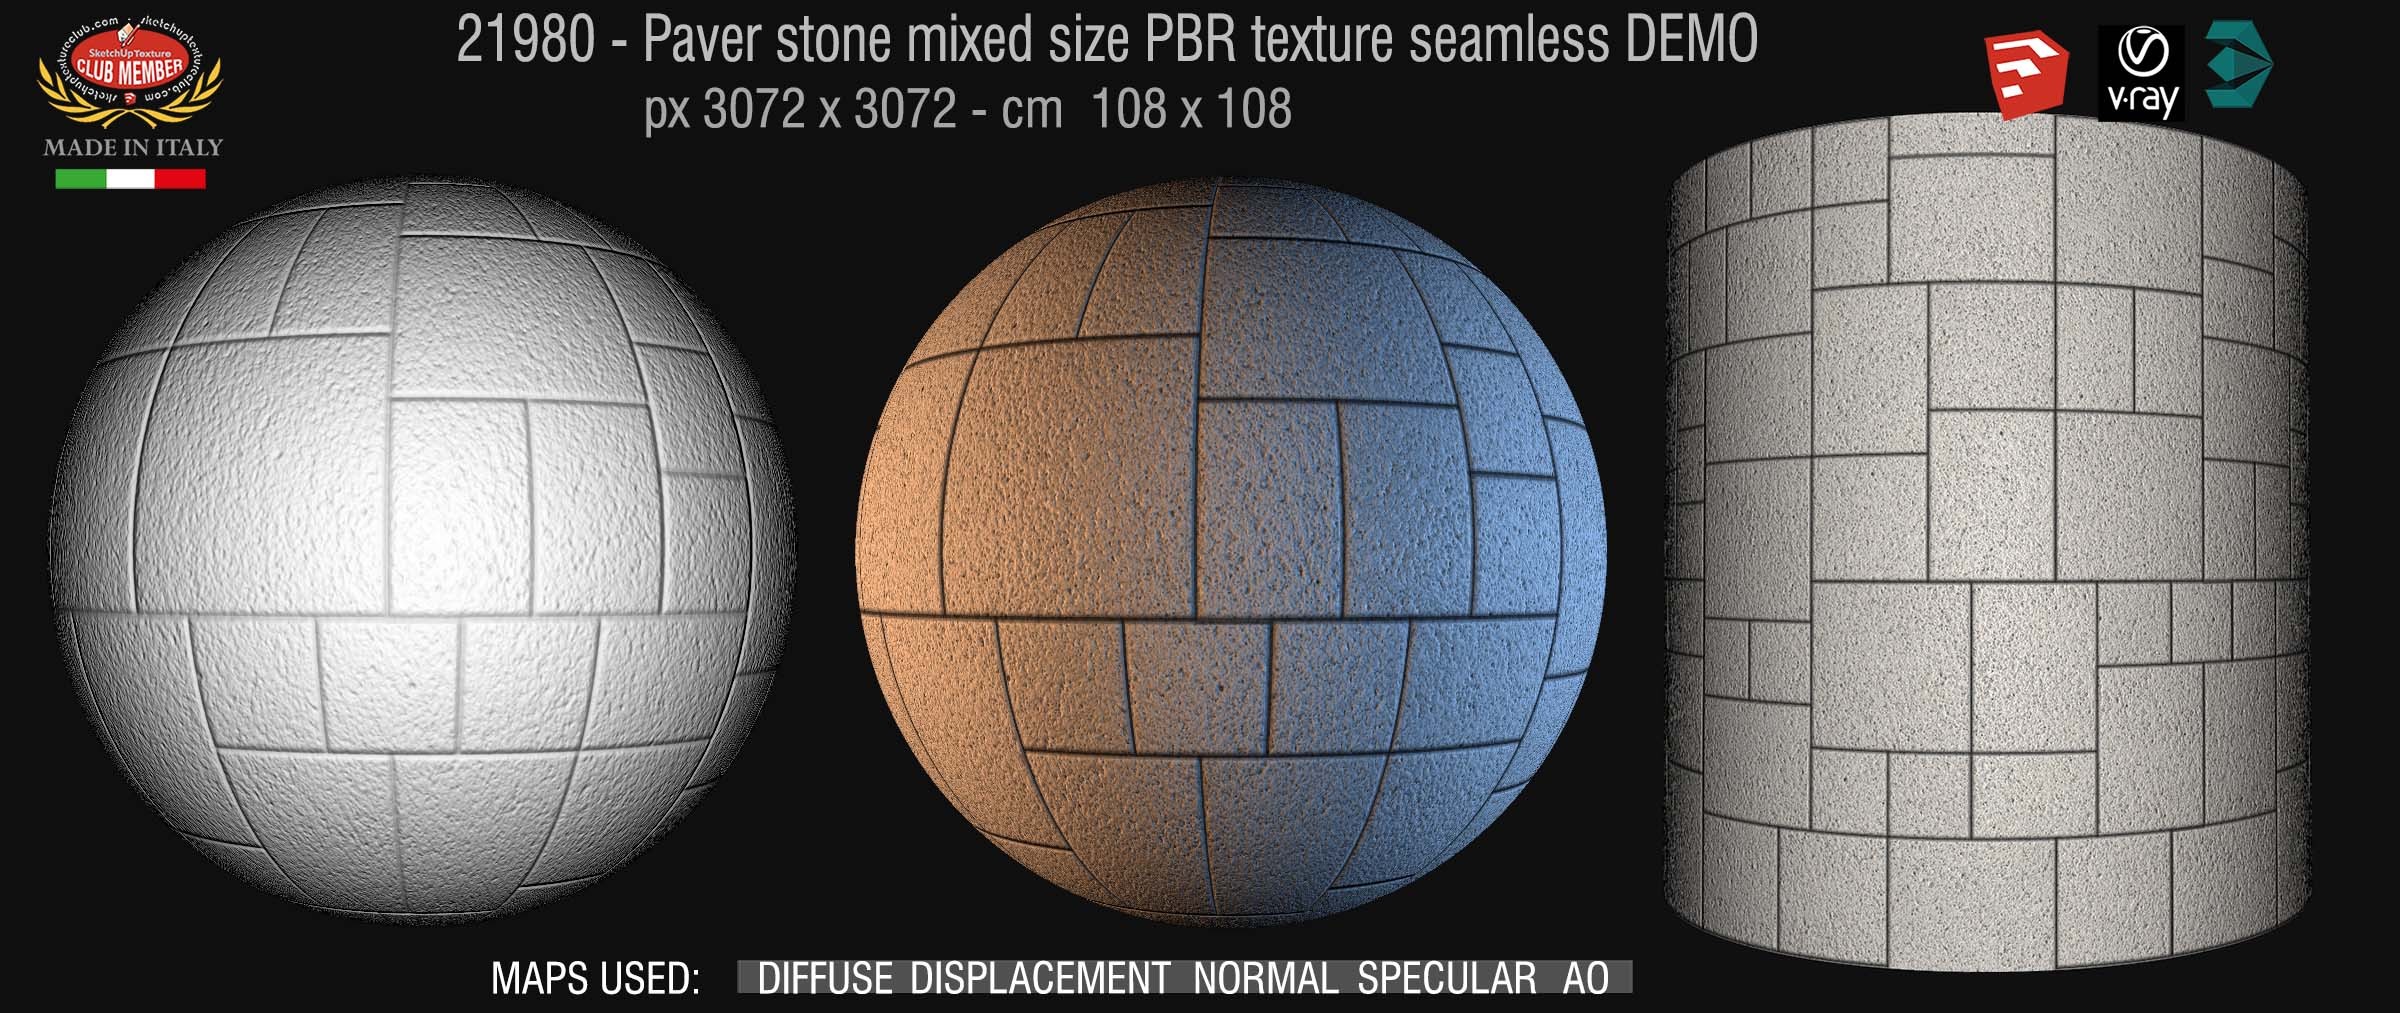 21980 pavers stone mixed size PBR texture seamless DEMO